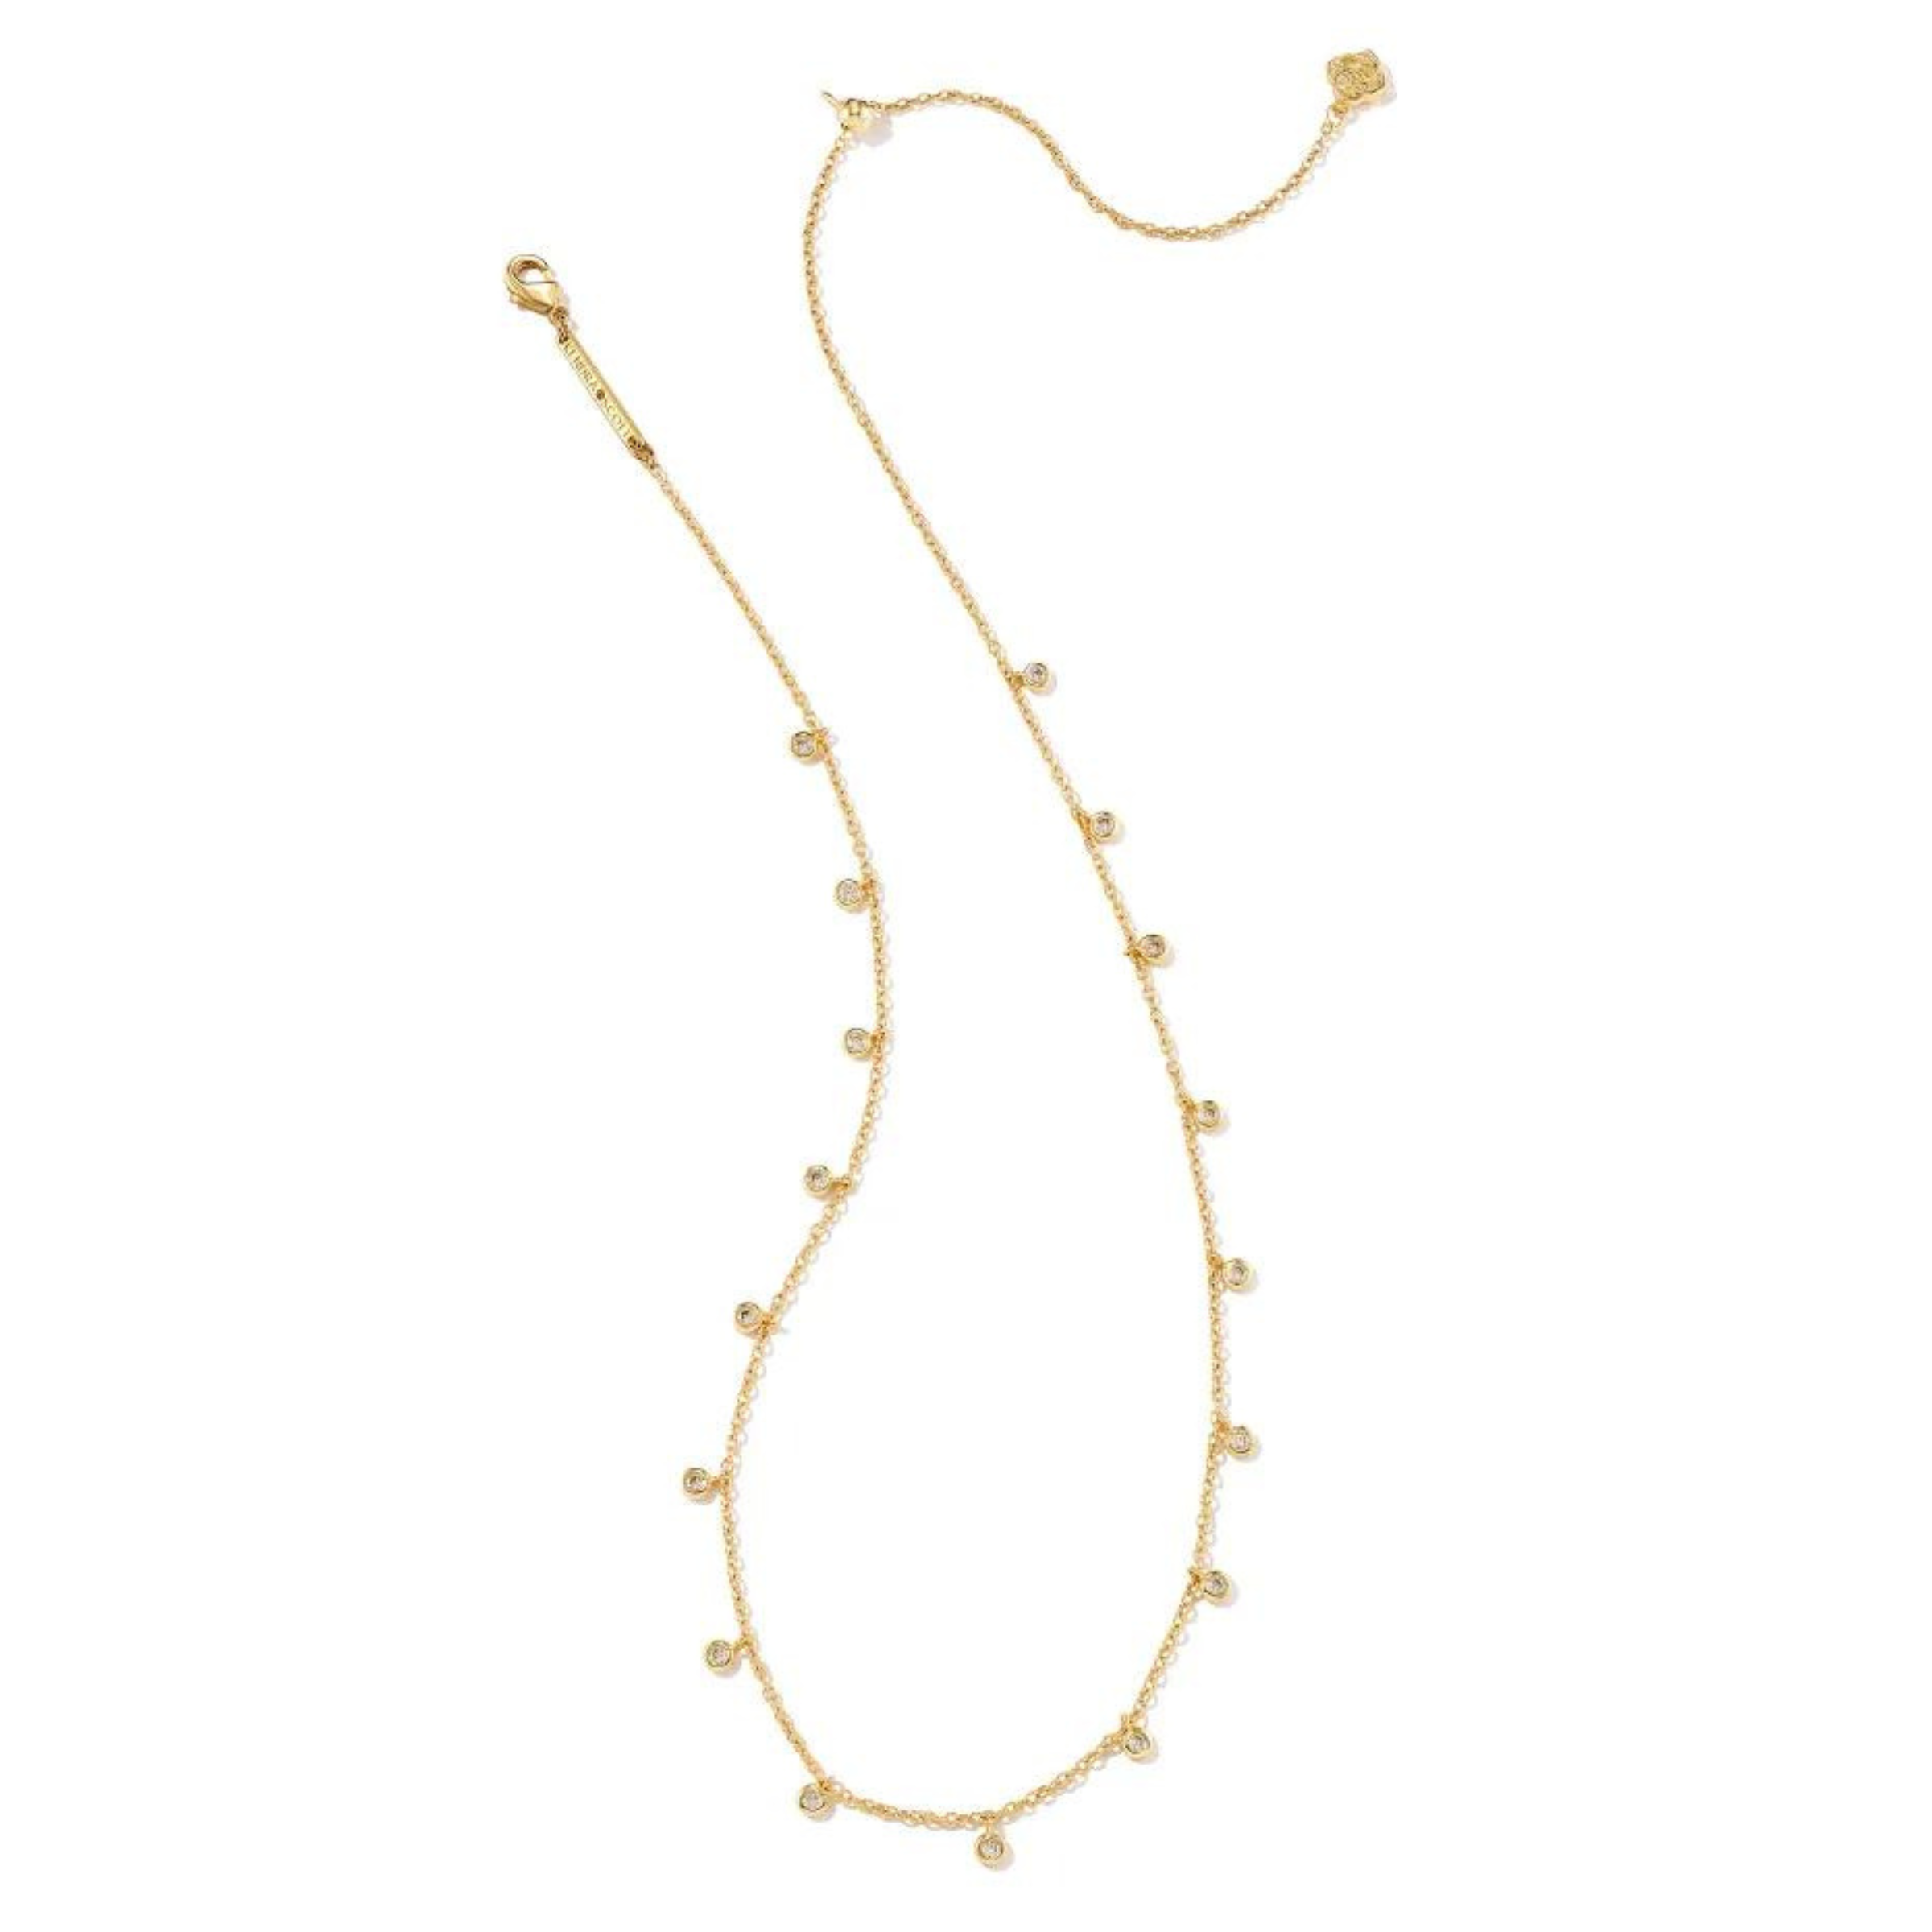 Kendra Scott | Amelia Chain Necklace in Gold - Giddy Up Glamour Boutique